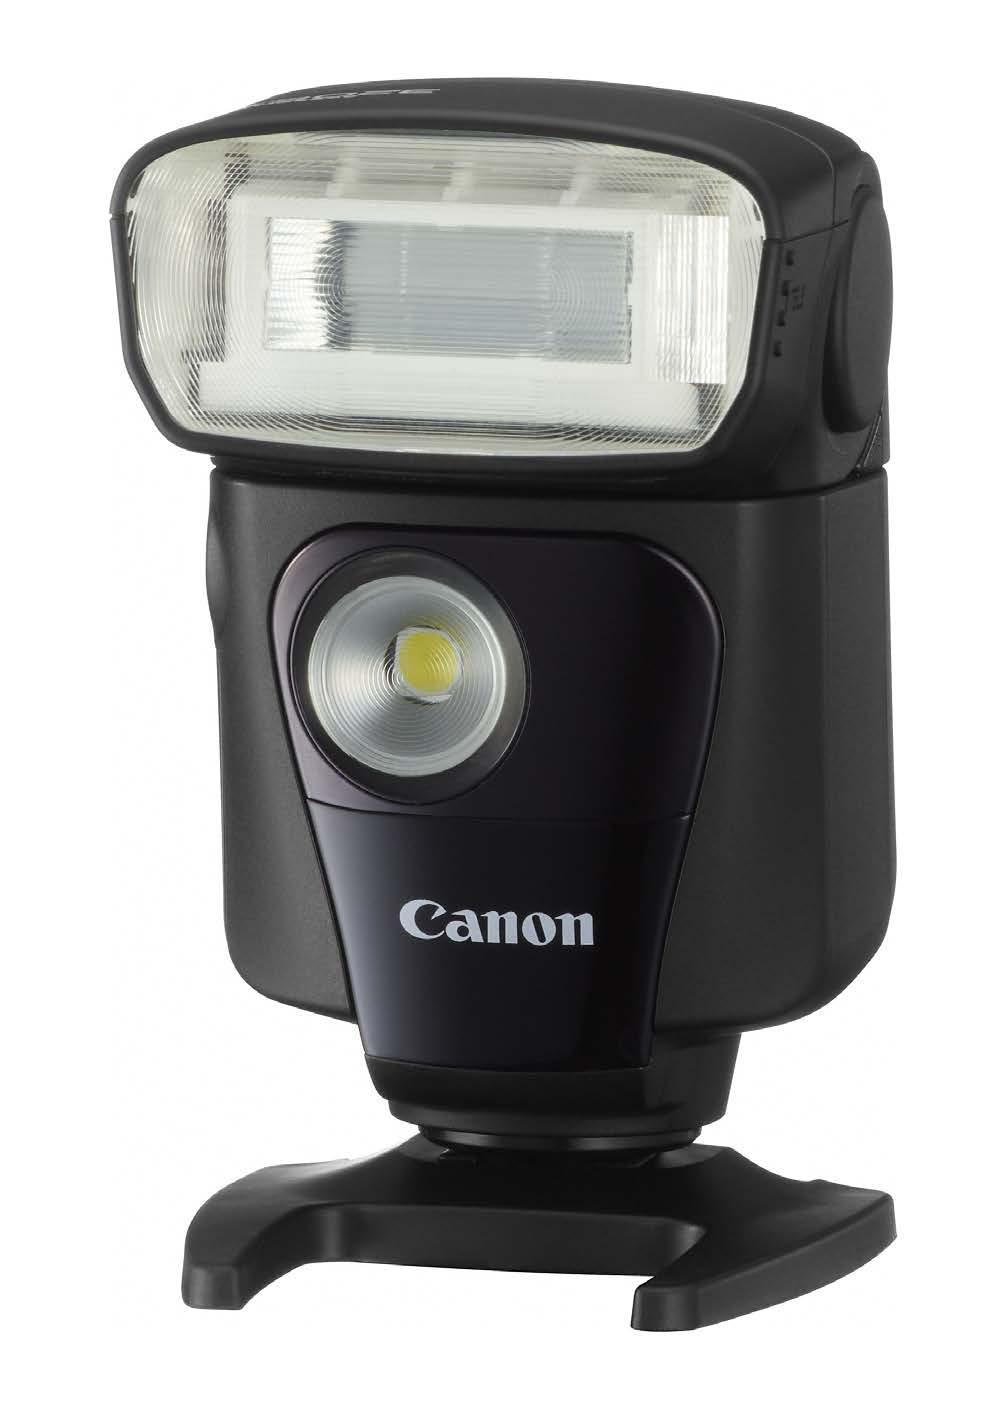 Chapter 1: Flash options within the EOS range 18 320 EX flashgun One of the newer flash units to the Canon range features an LED light on the front of the flash, which can be used to provide